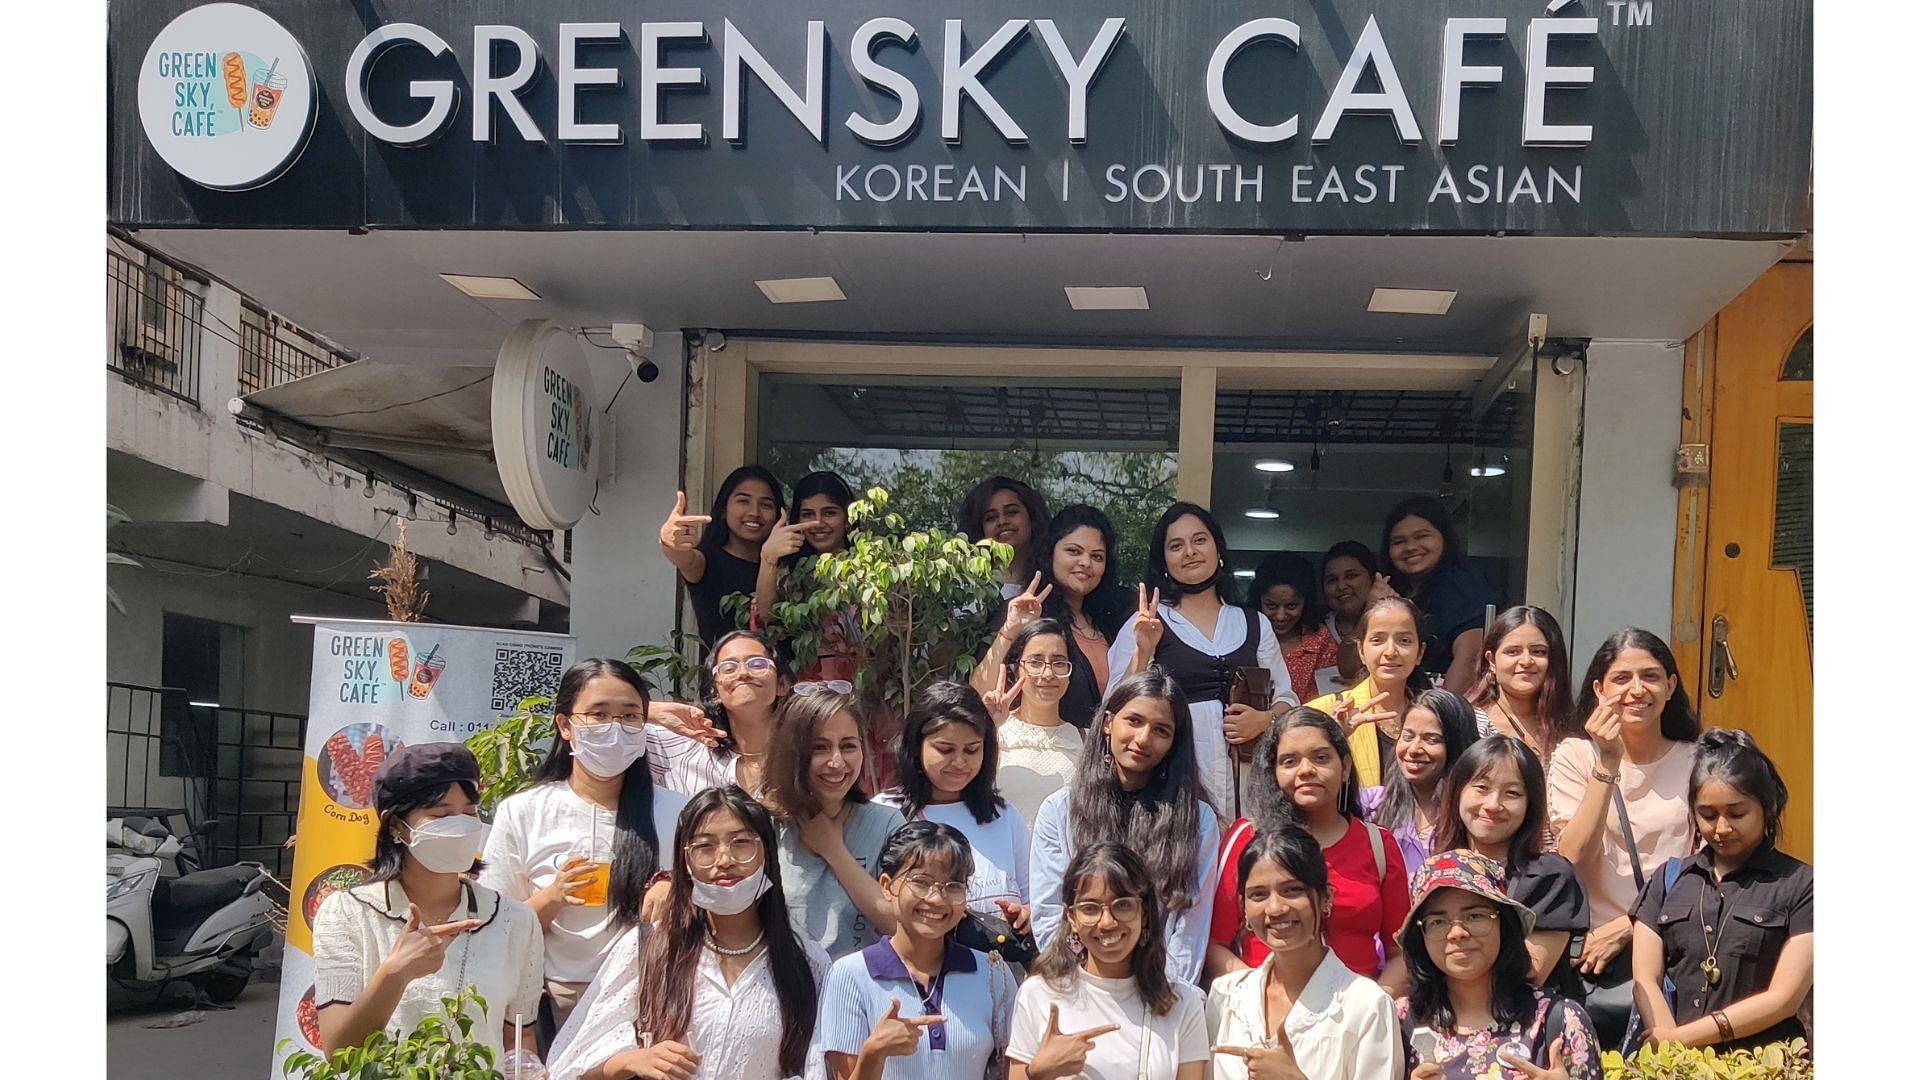 Indian EXO-Ls in the 10th EXO Anniversary fan event at Green sky cafe (Image via Sportskeeda)